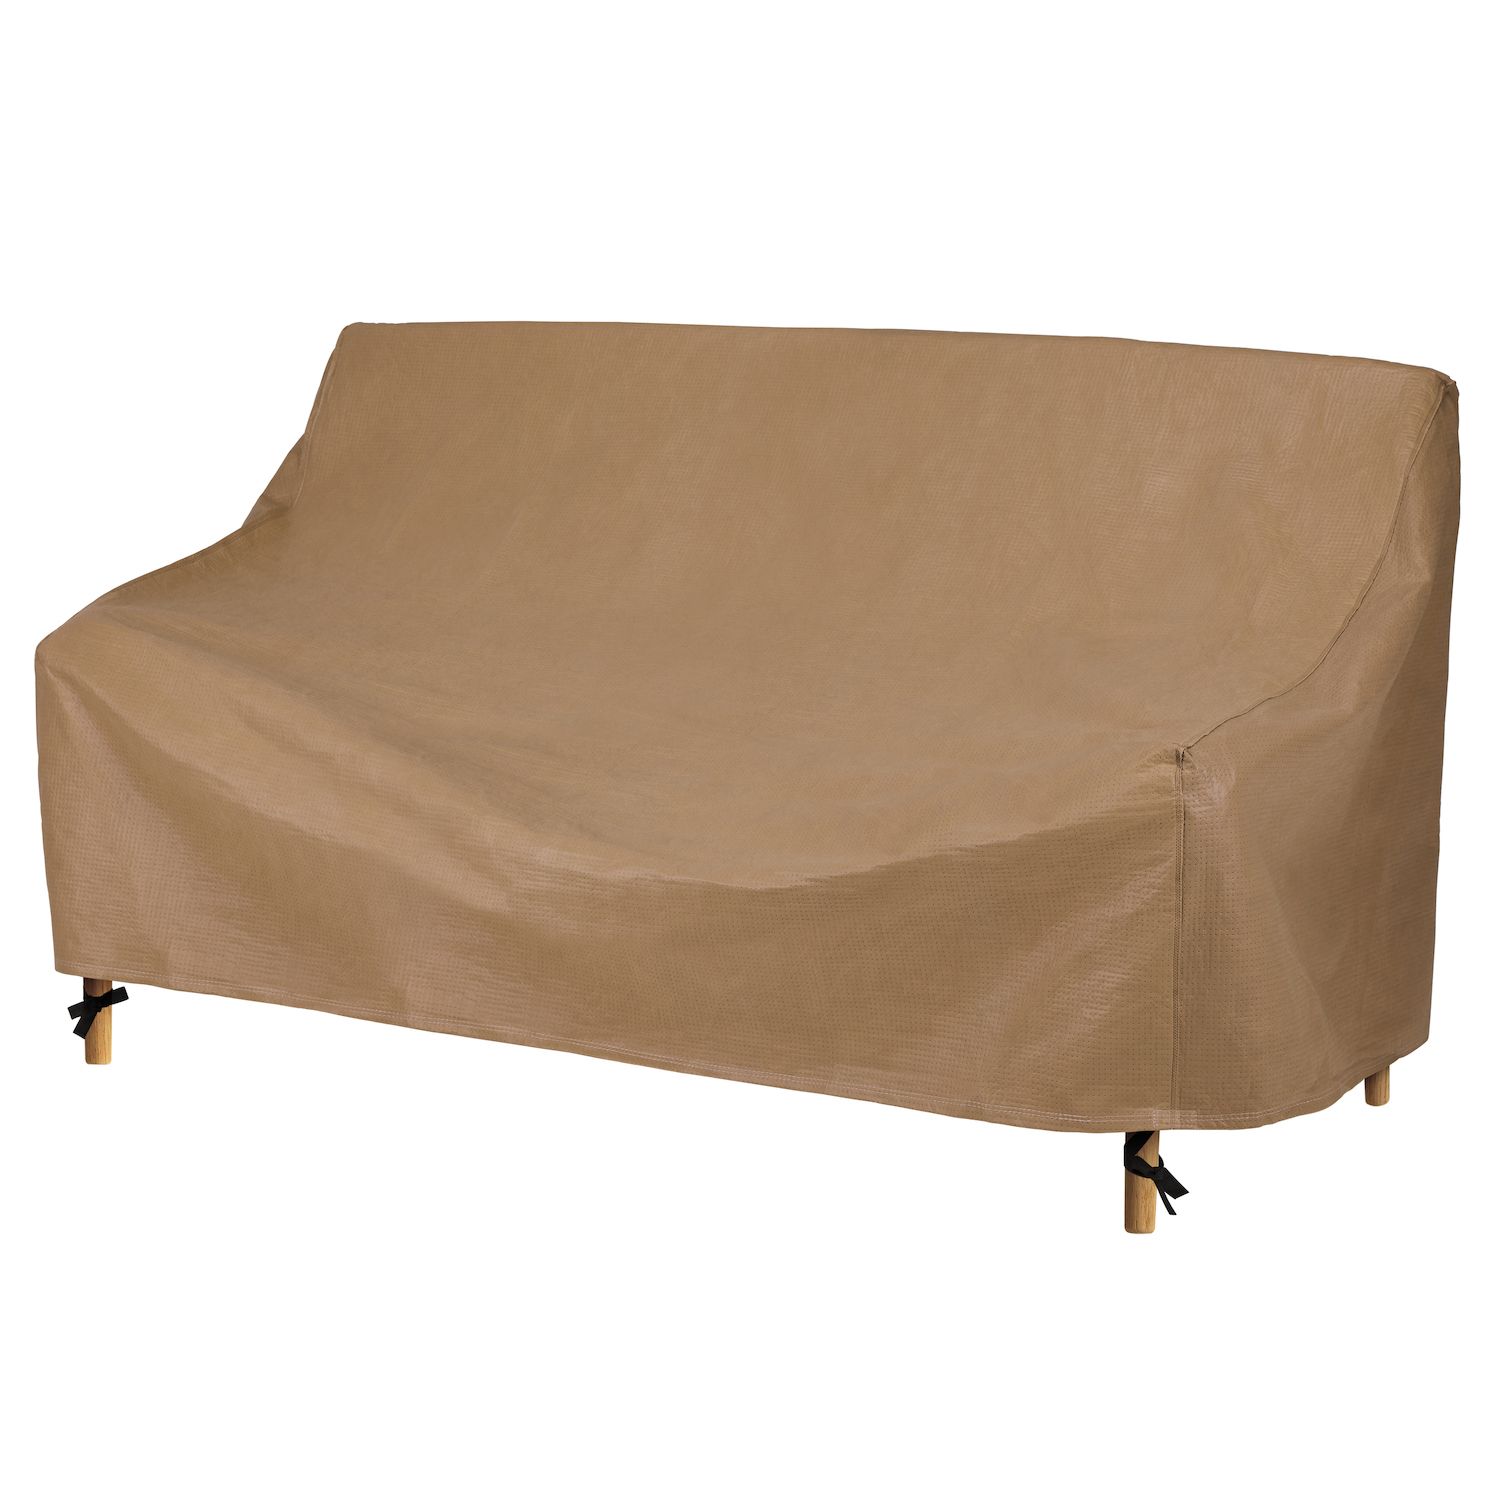 Image for Duck Covers Essential 93-in. Patio Sofa Cover at Kohl's.